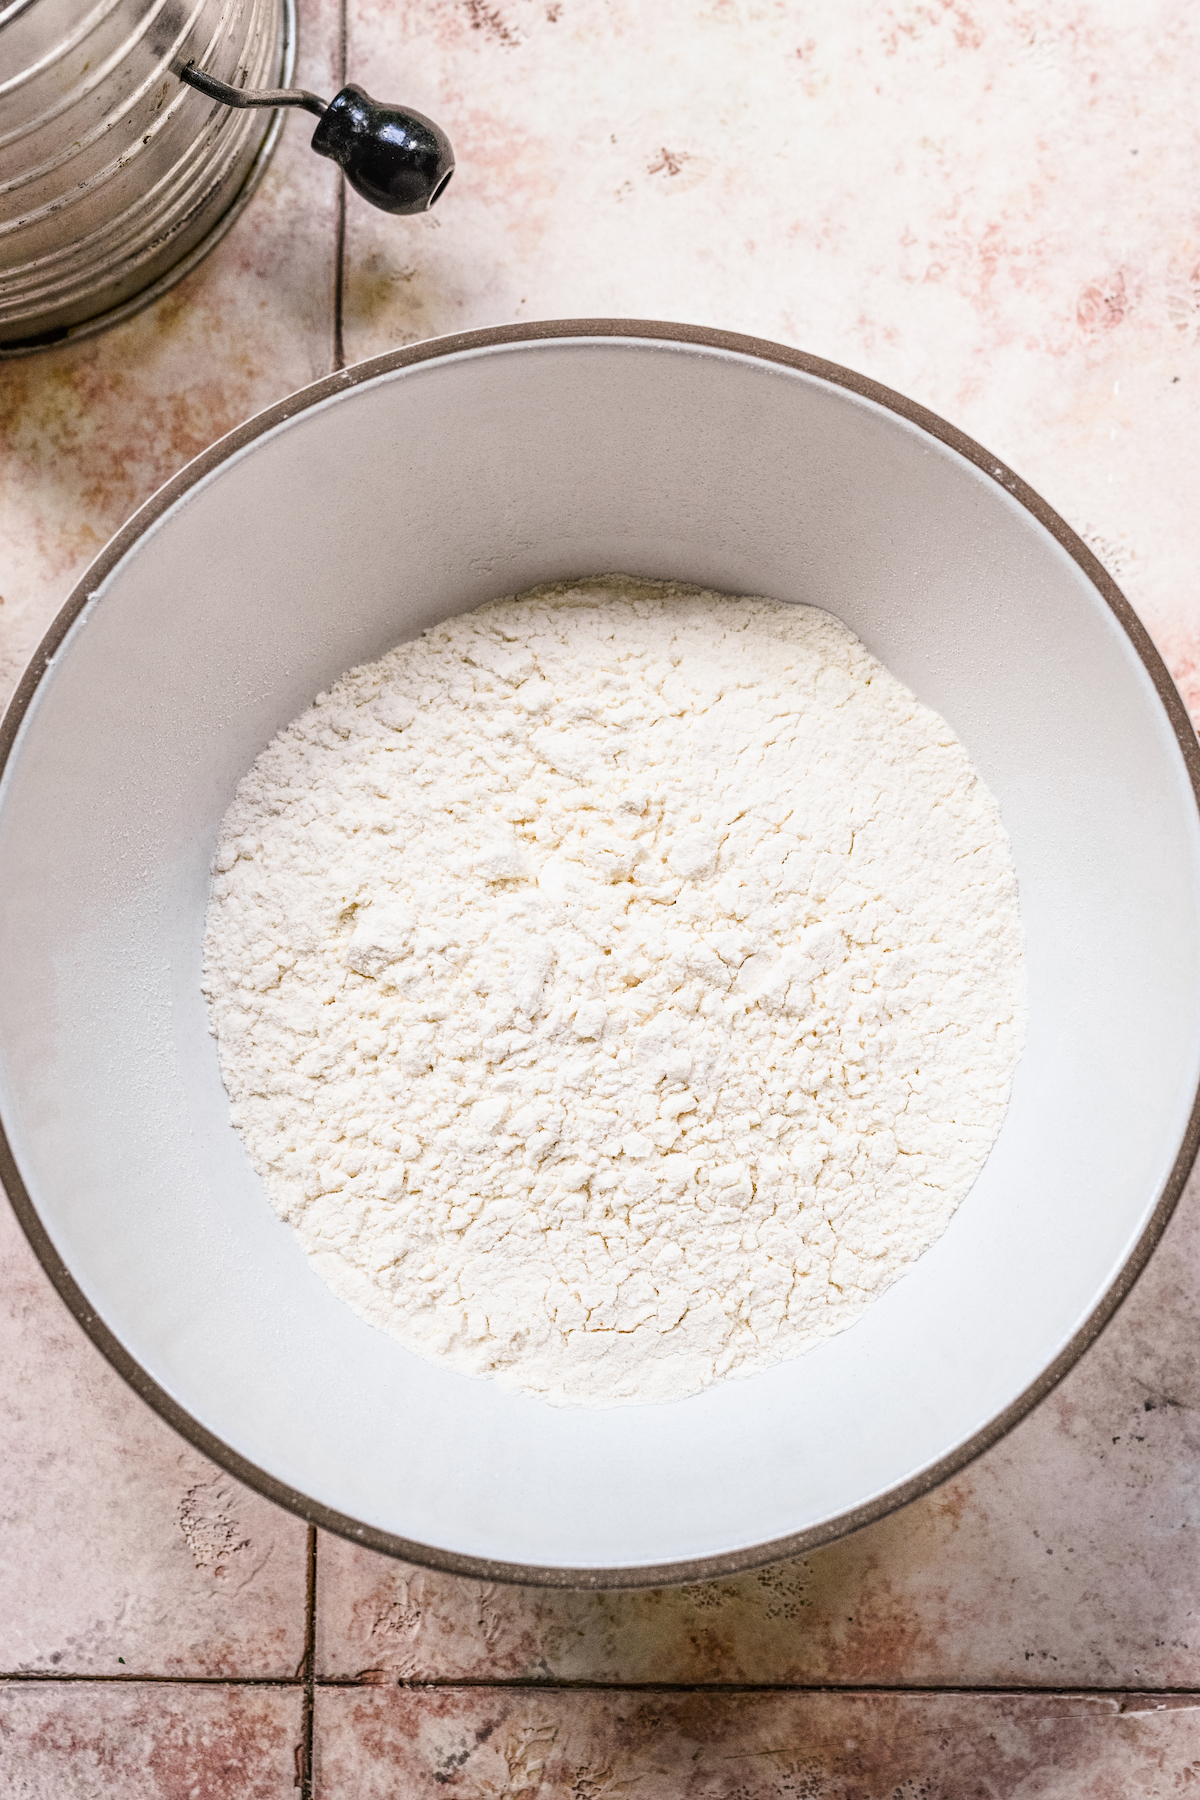 One and 1/4 cup of loose all-purpose flour spooned and leveled into a mixing bowl.